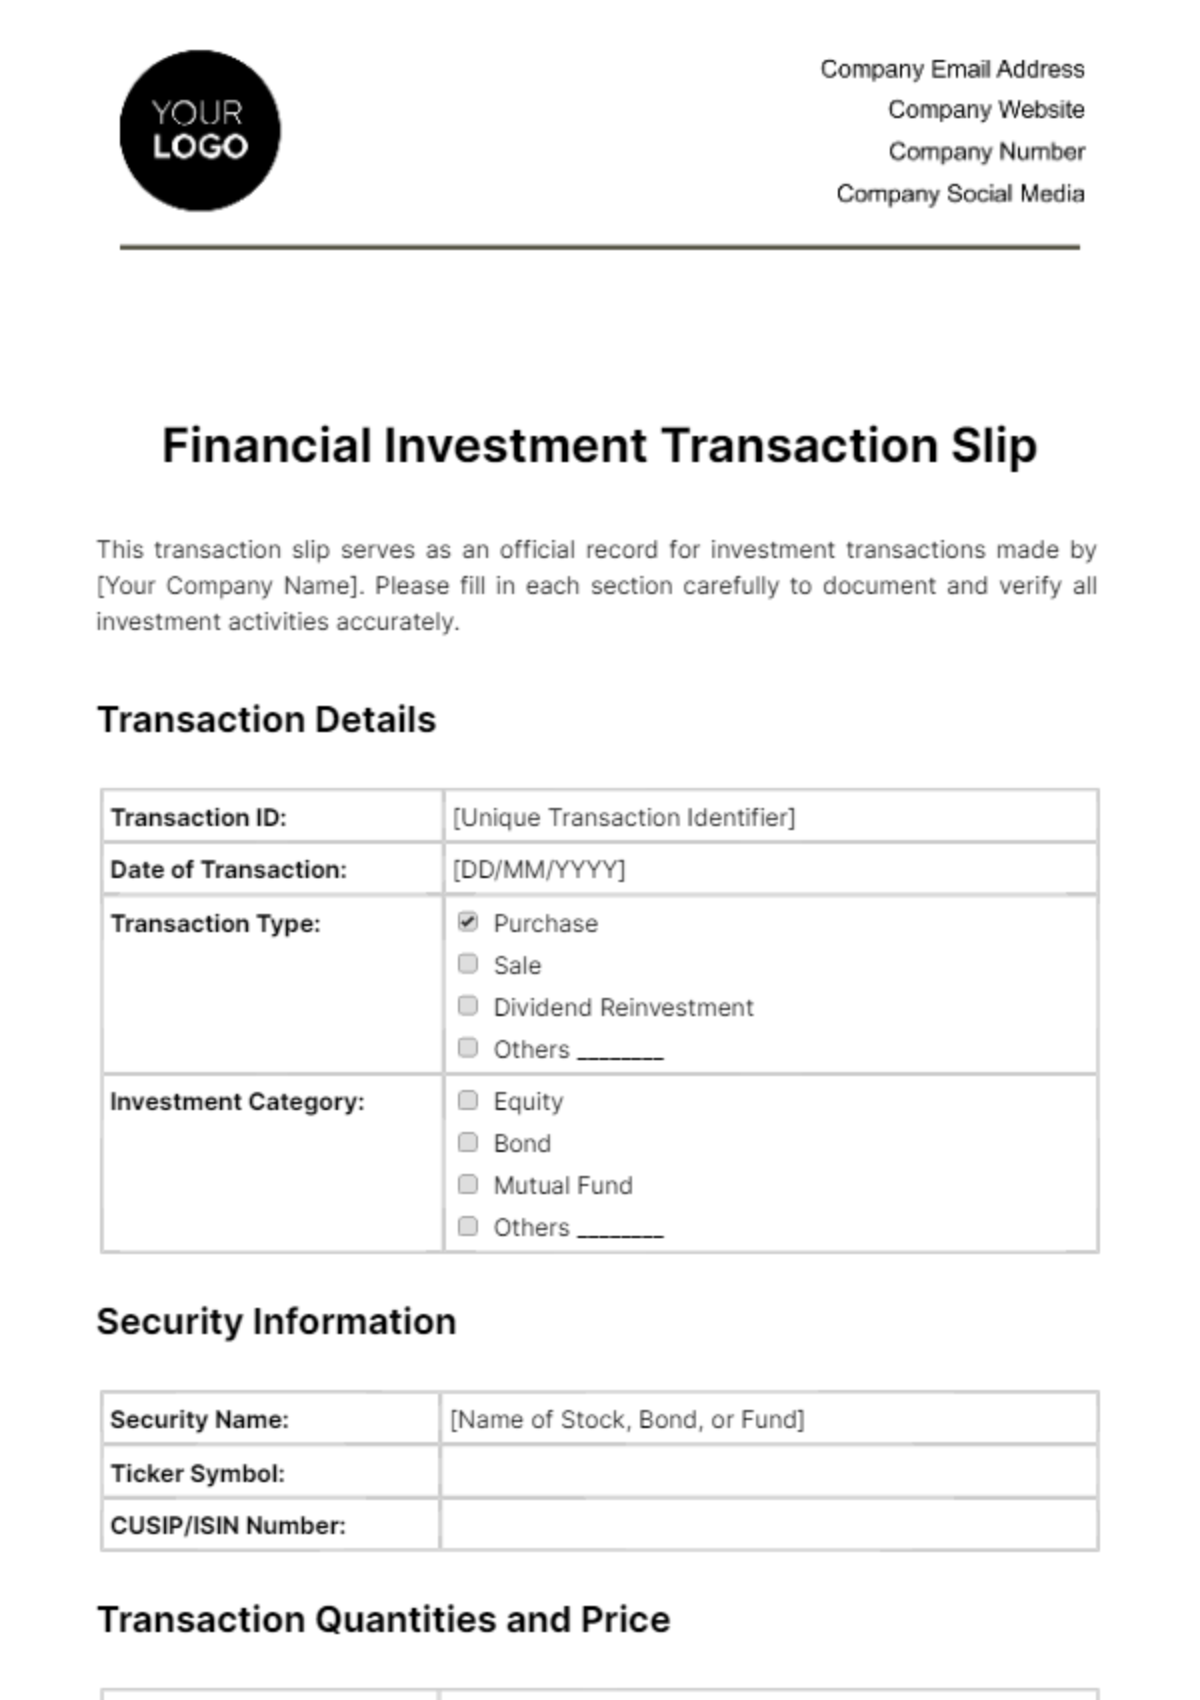 Free Financial Investment Transaction Slip Template